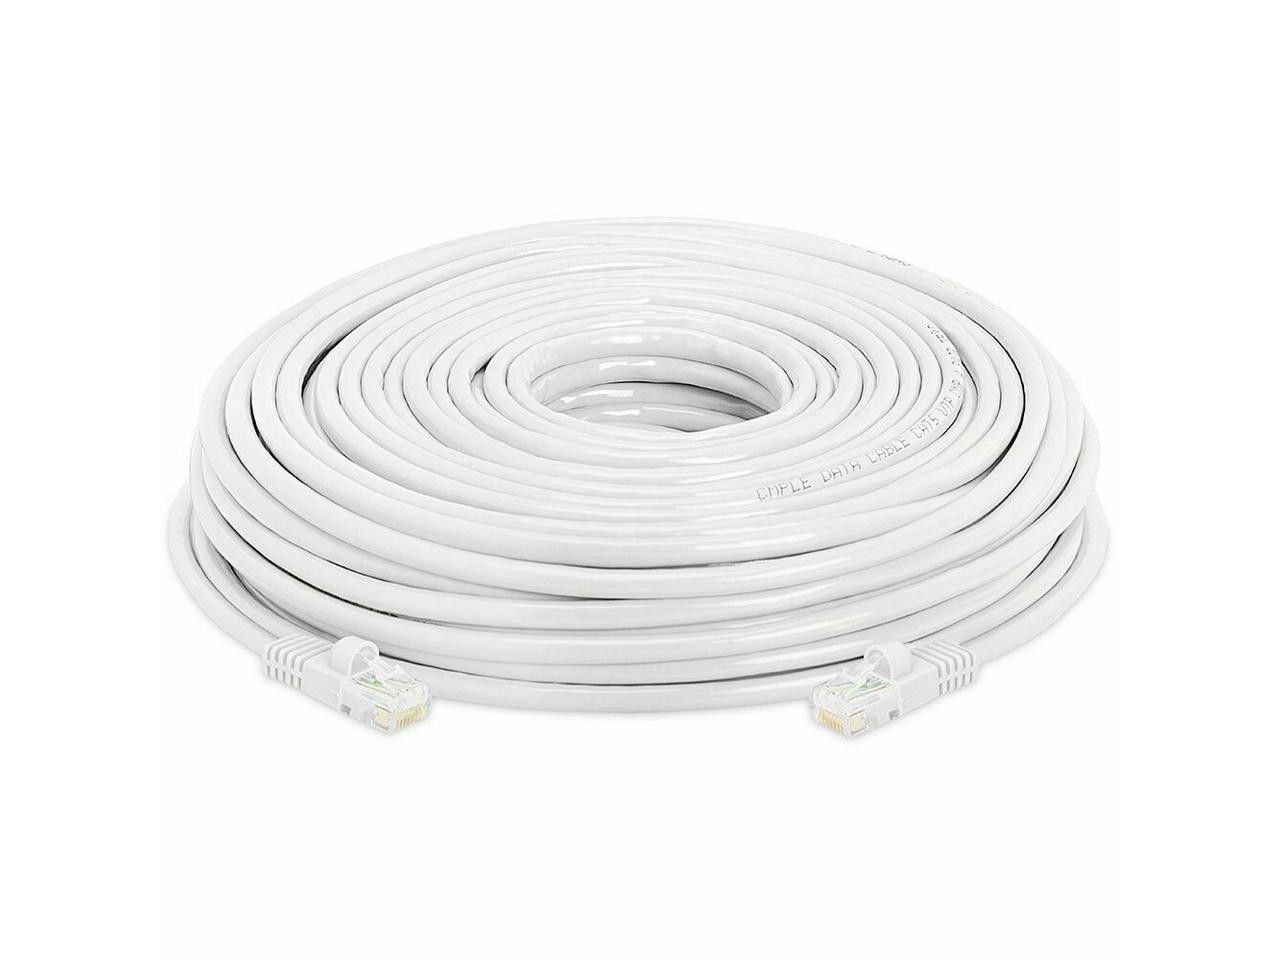 100 FT RJ45 Cat5 Ethernet LAN Network Cable for PC PS XBox Internet Router White 